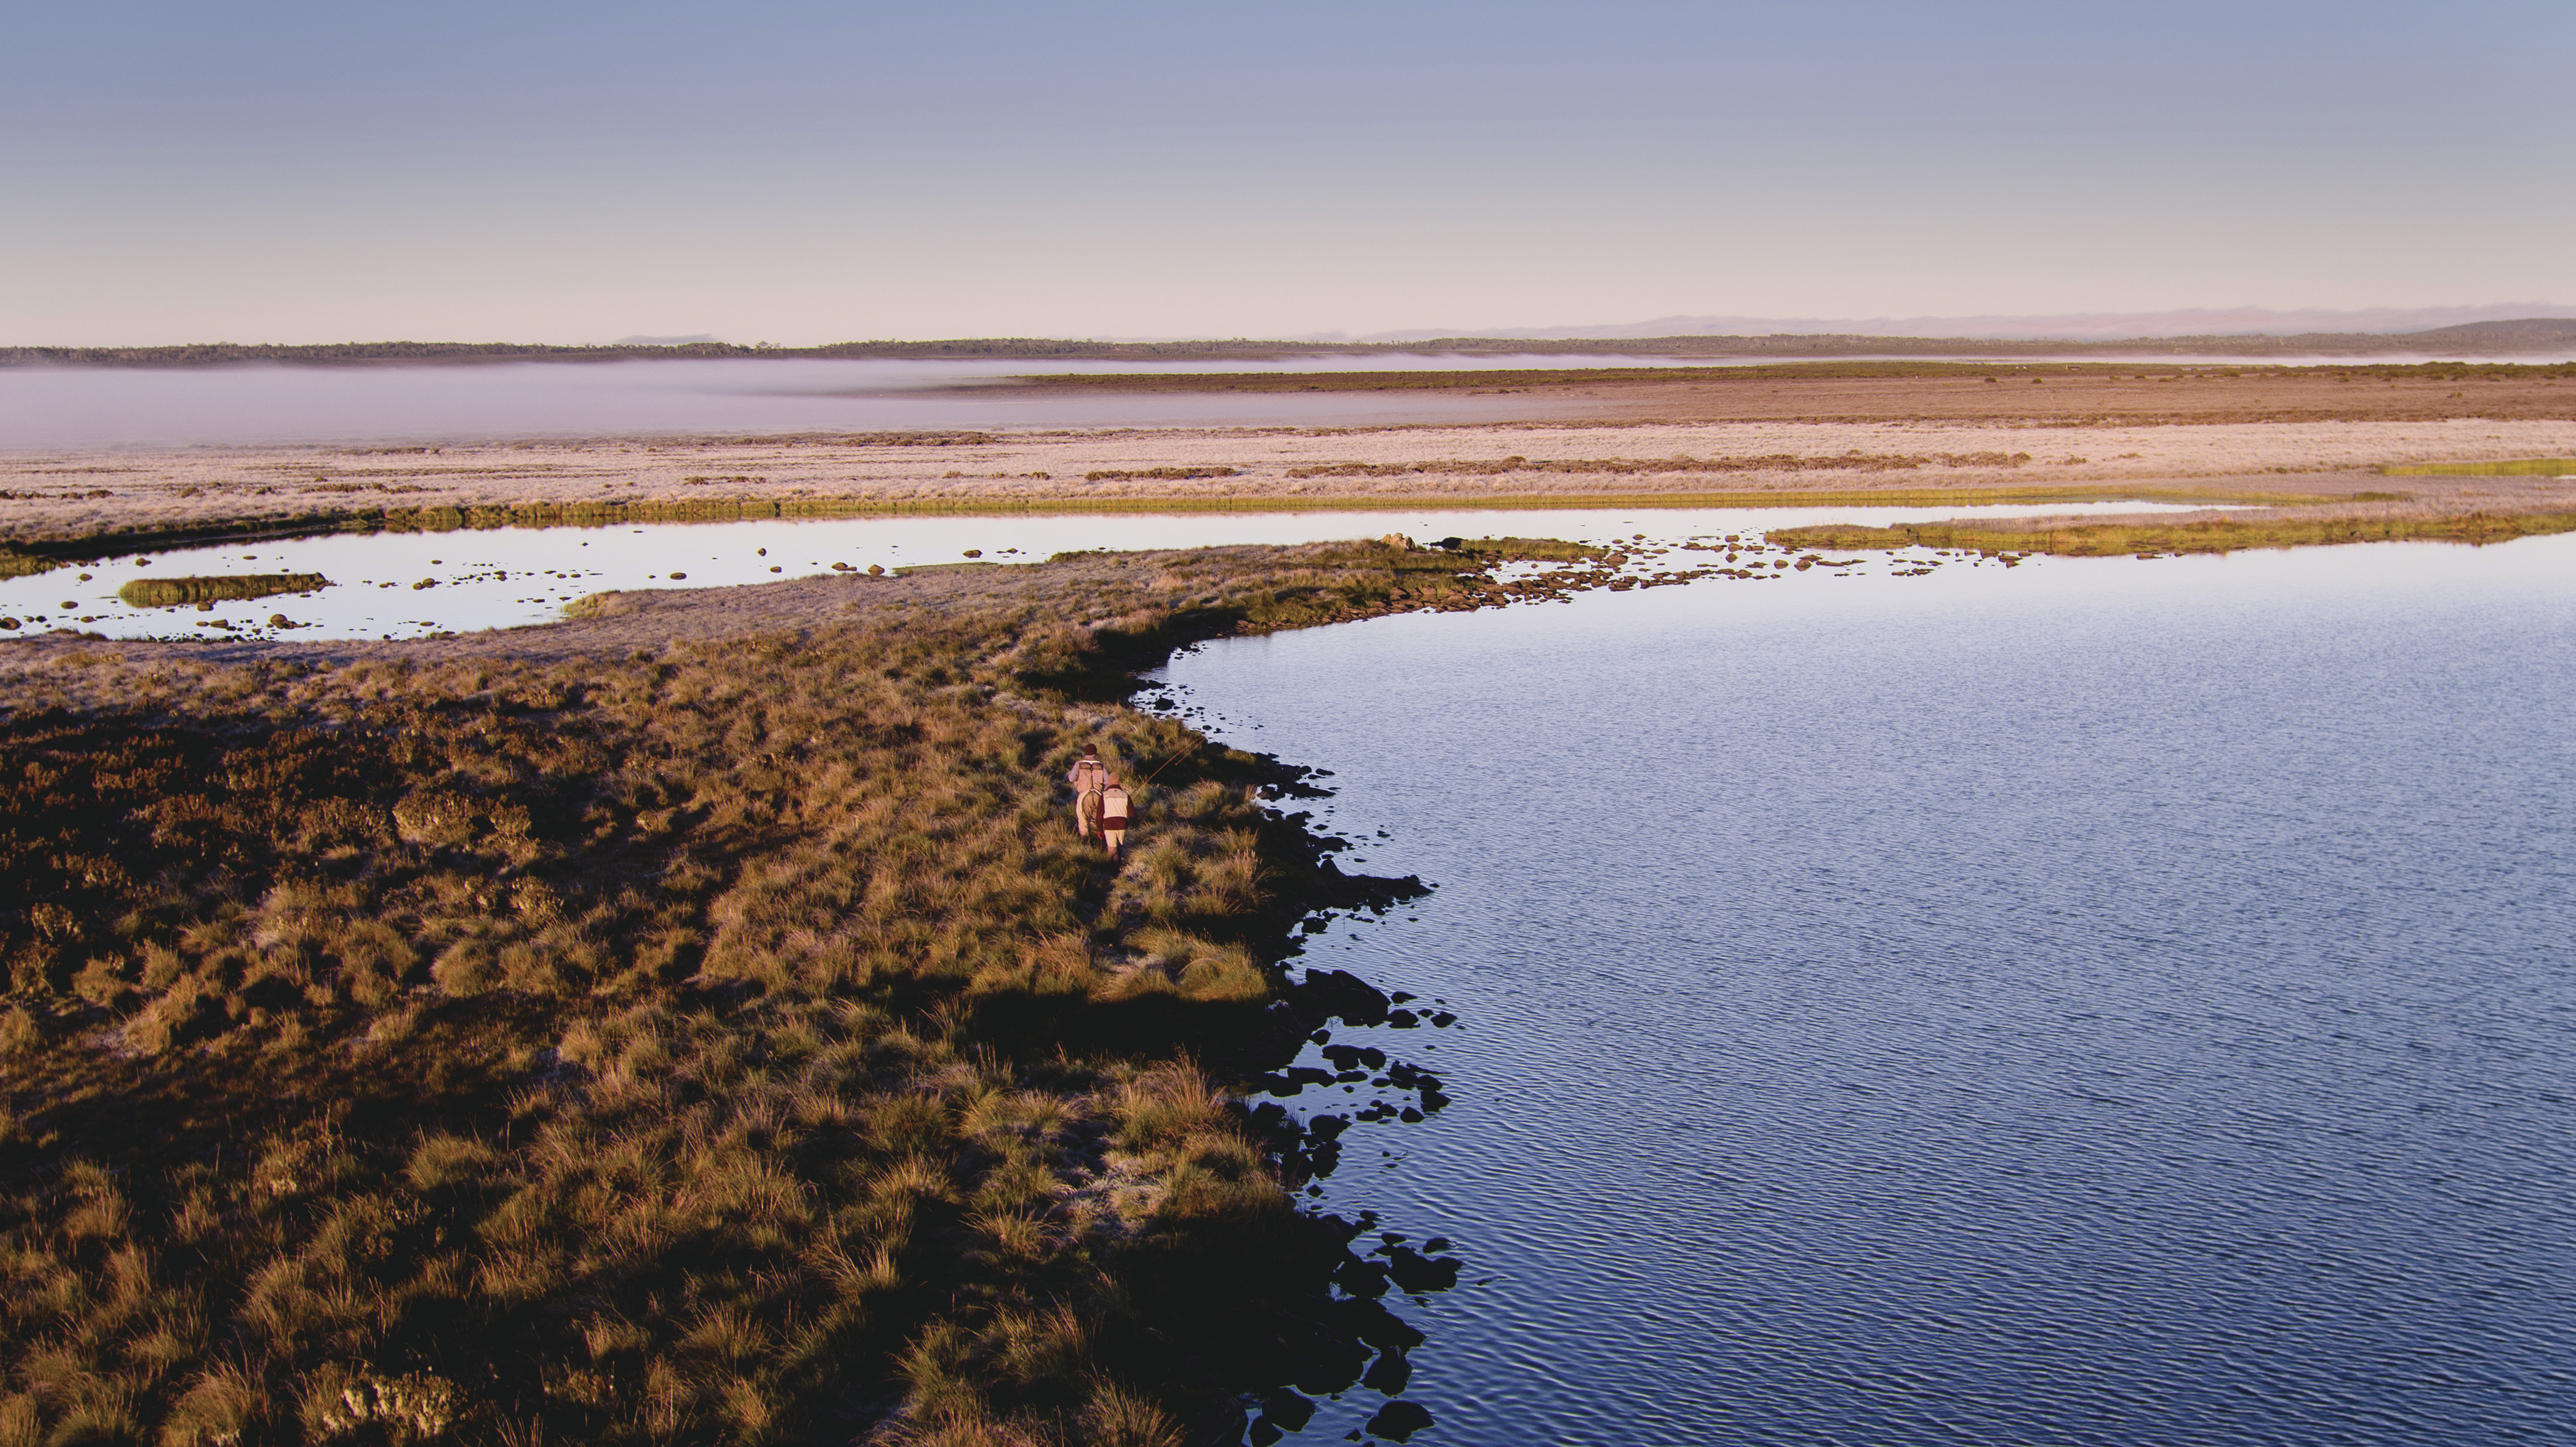 Aerial of Nineteen Lagoons, two people look small amongst the empty landscape.